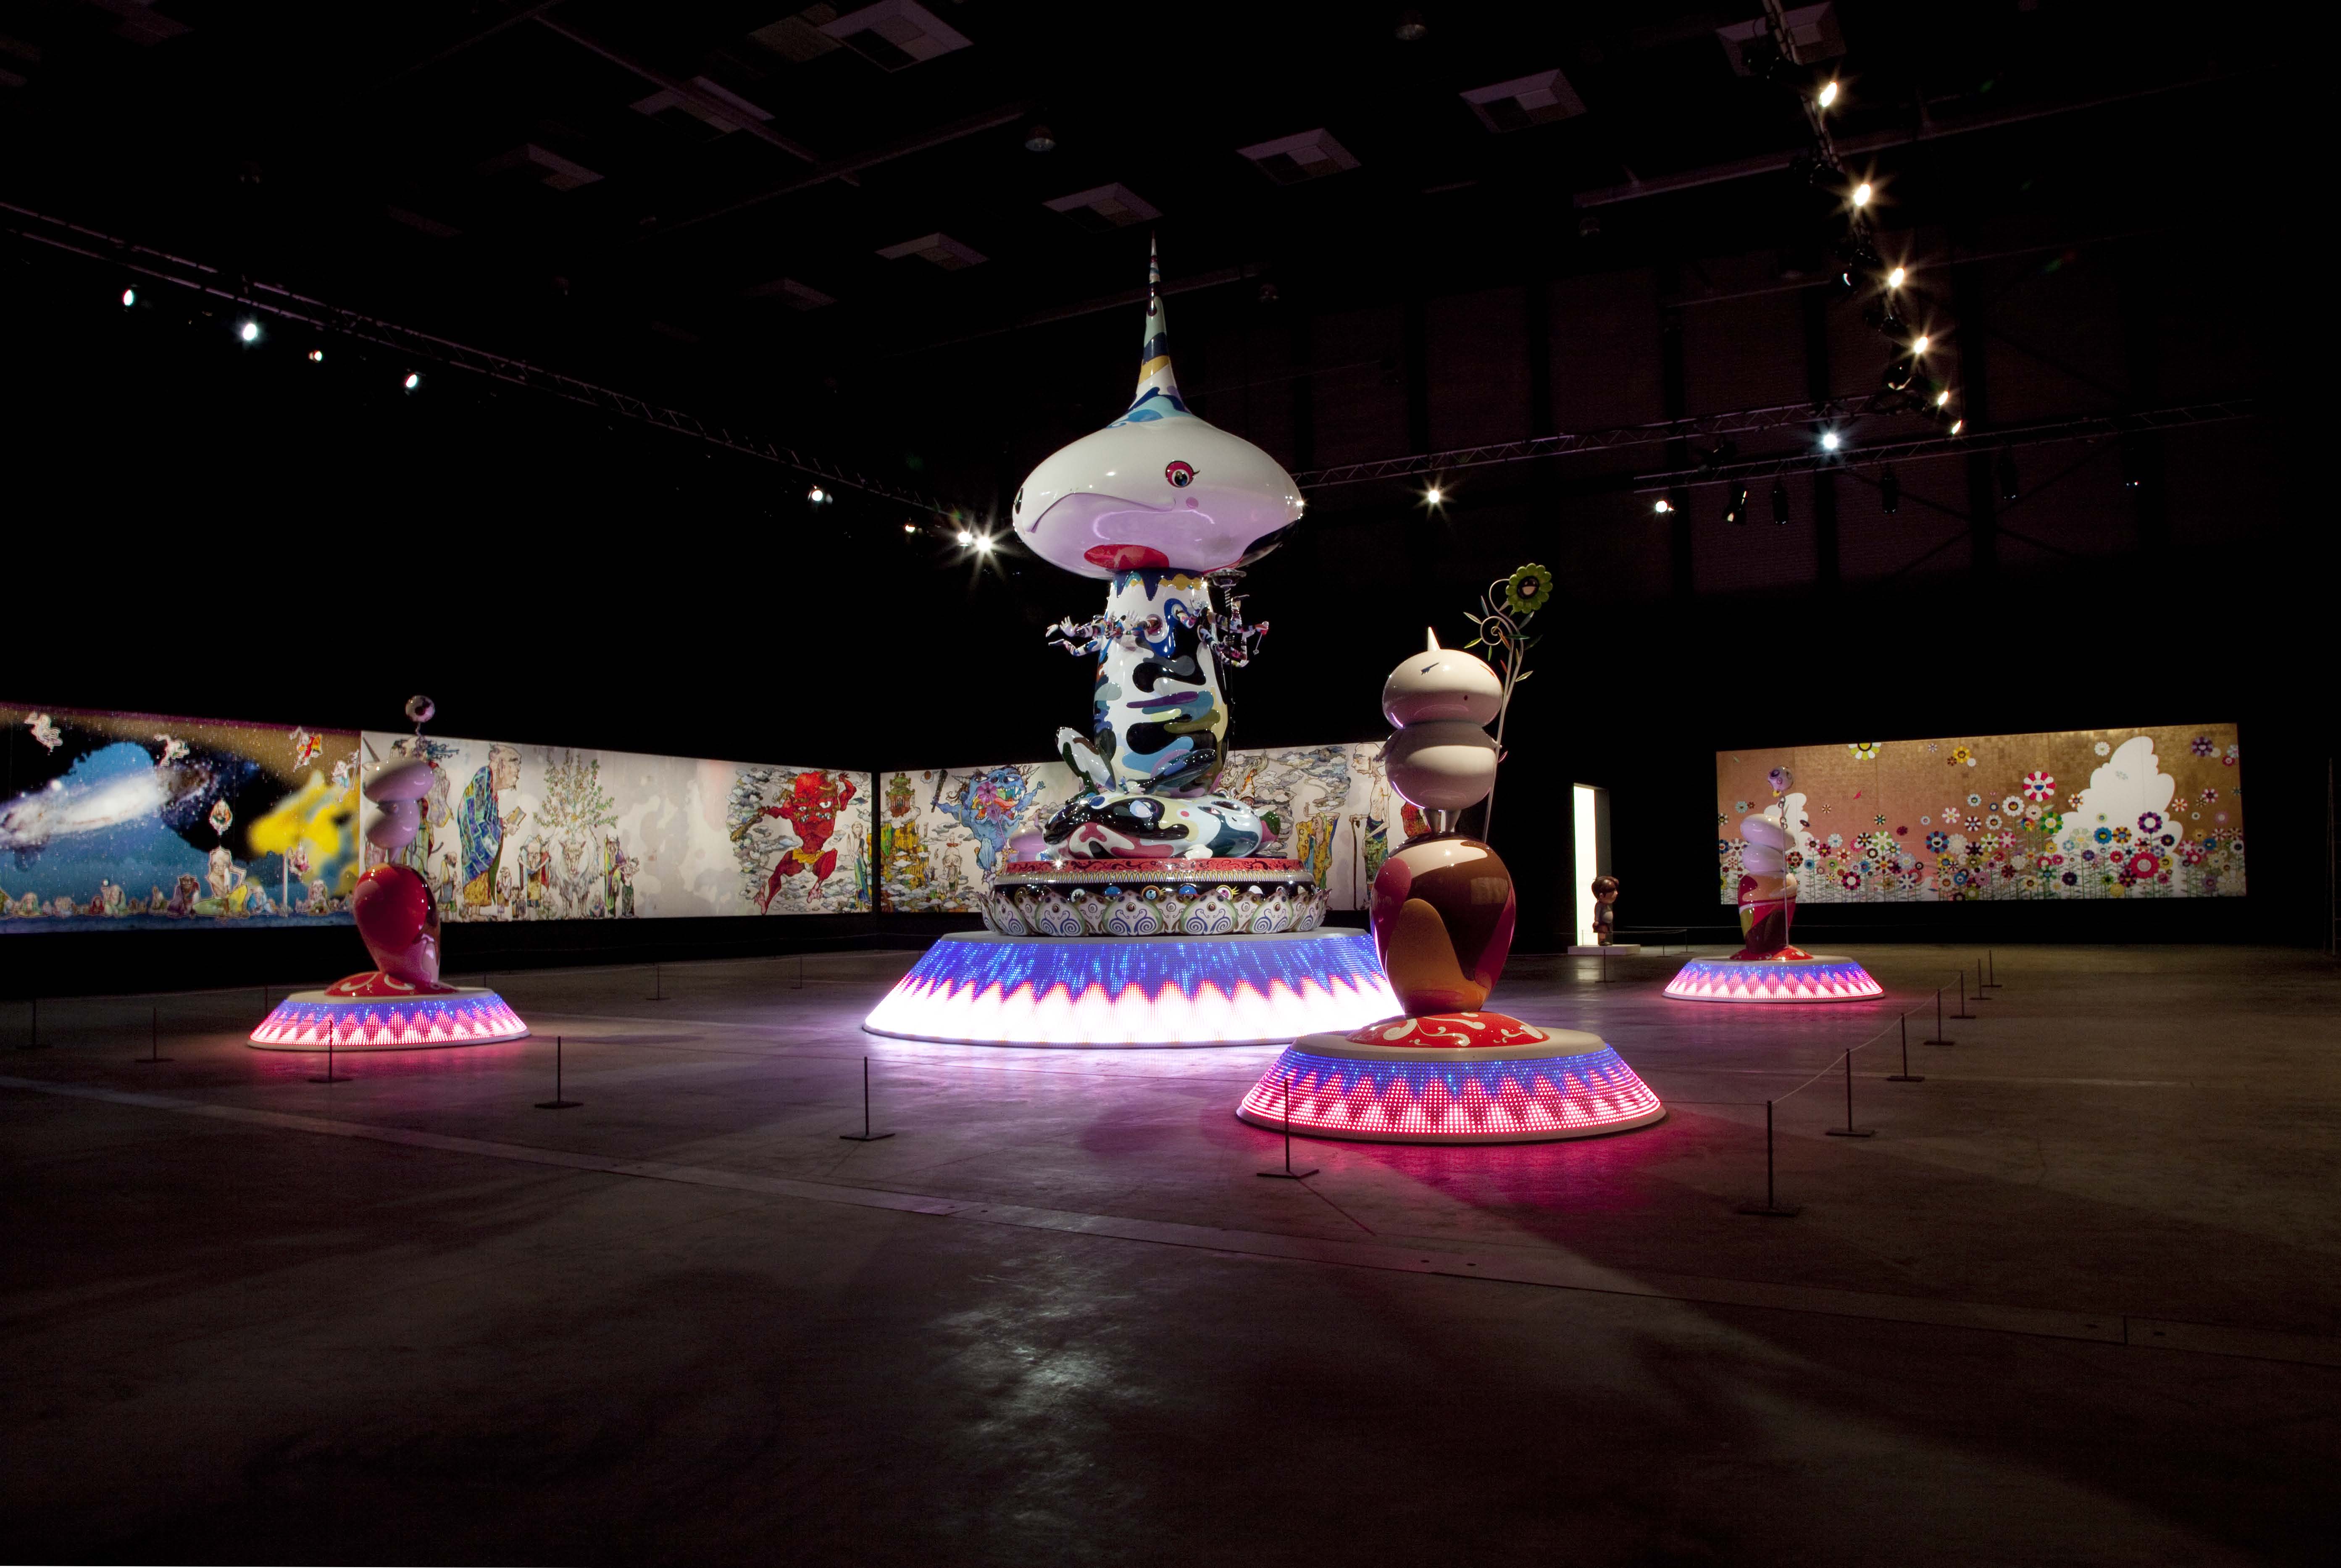 Illuminated sculptures on display in a wide exhibition space during Ego by Takashi Murakami in Qatar.